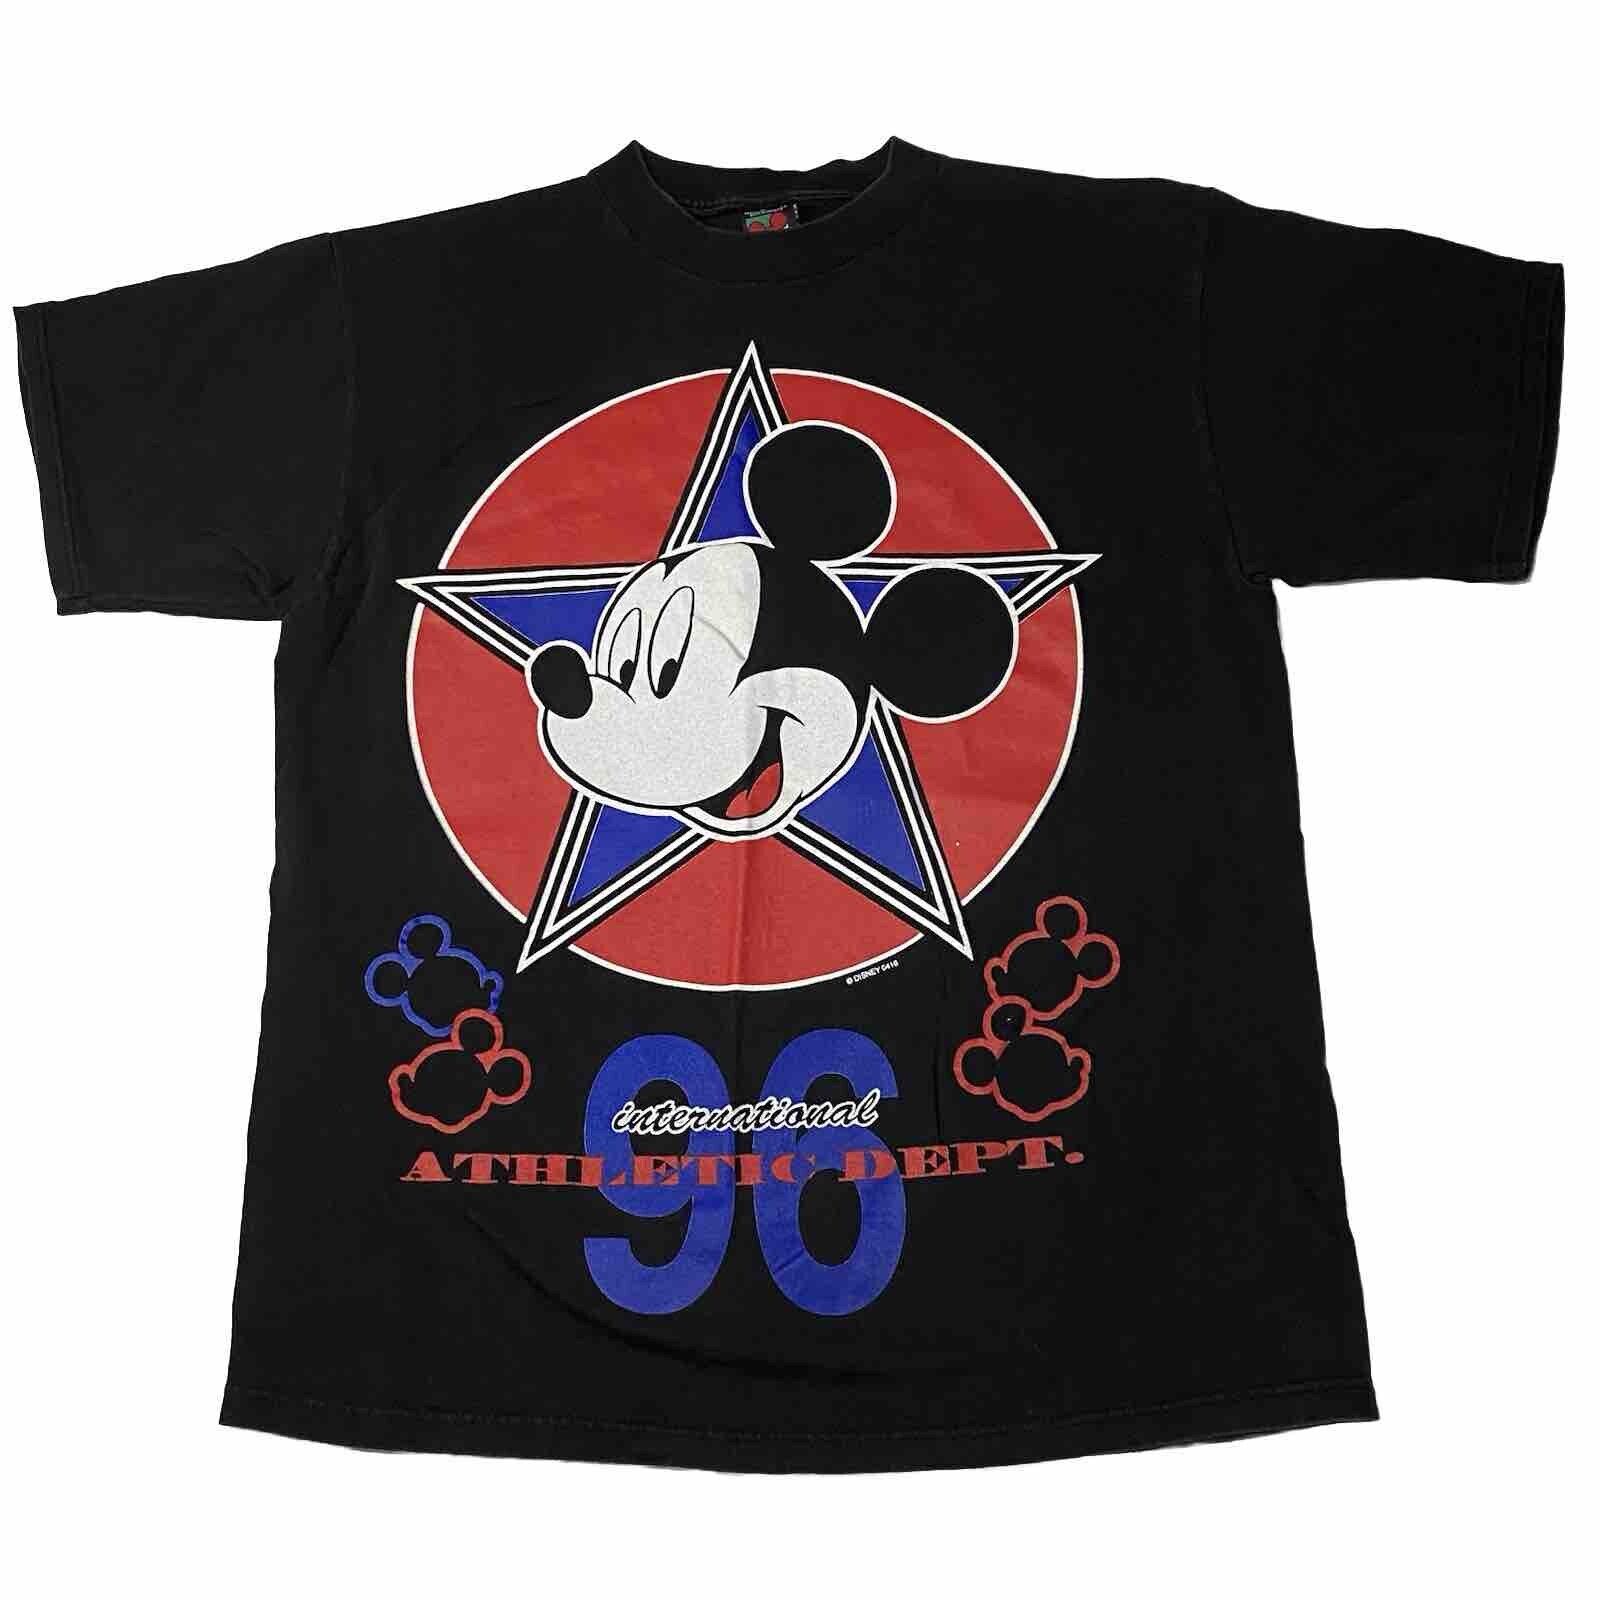 Vintage 90s Disney Mickey Unlimited T Shirt Black Made in USA One Size Fits All